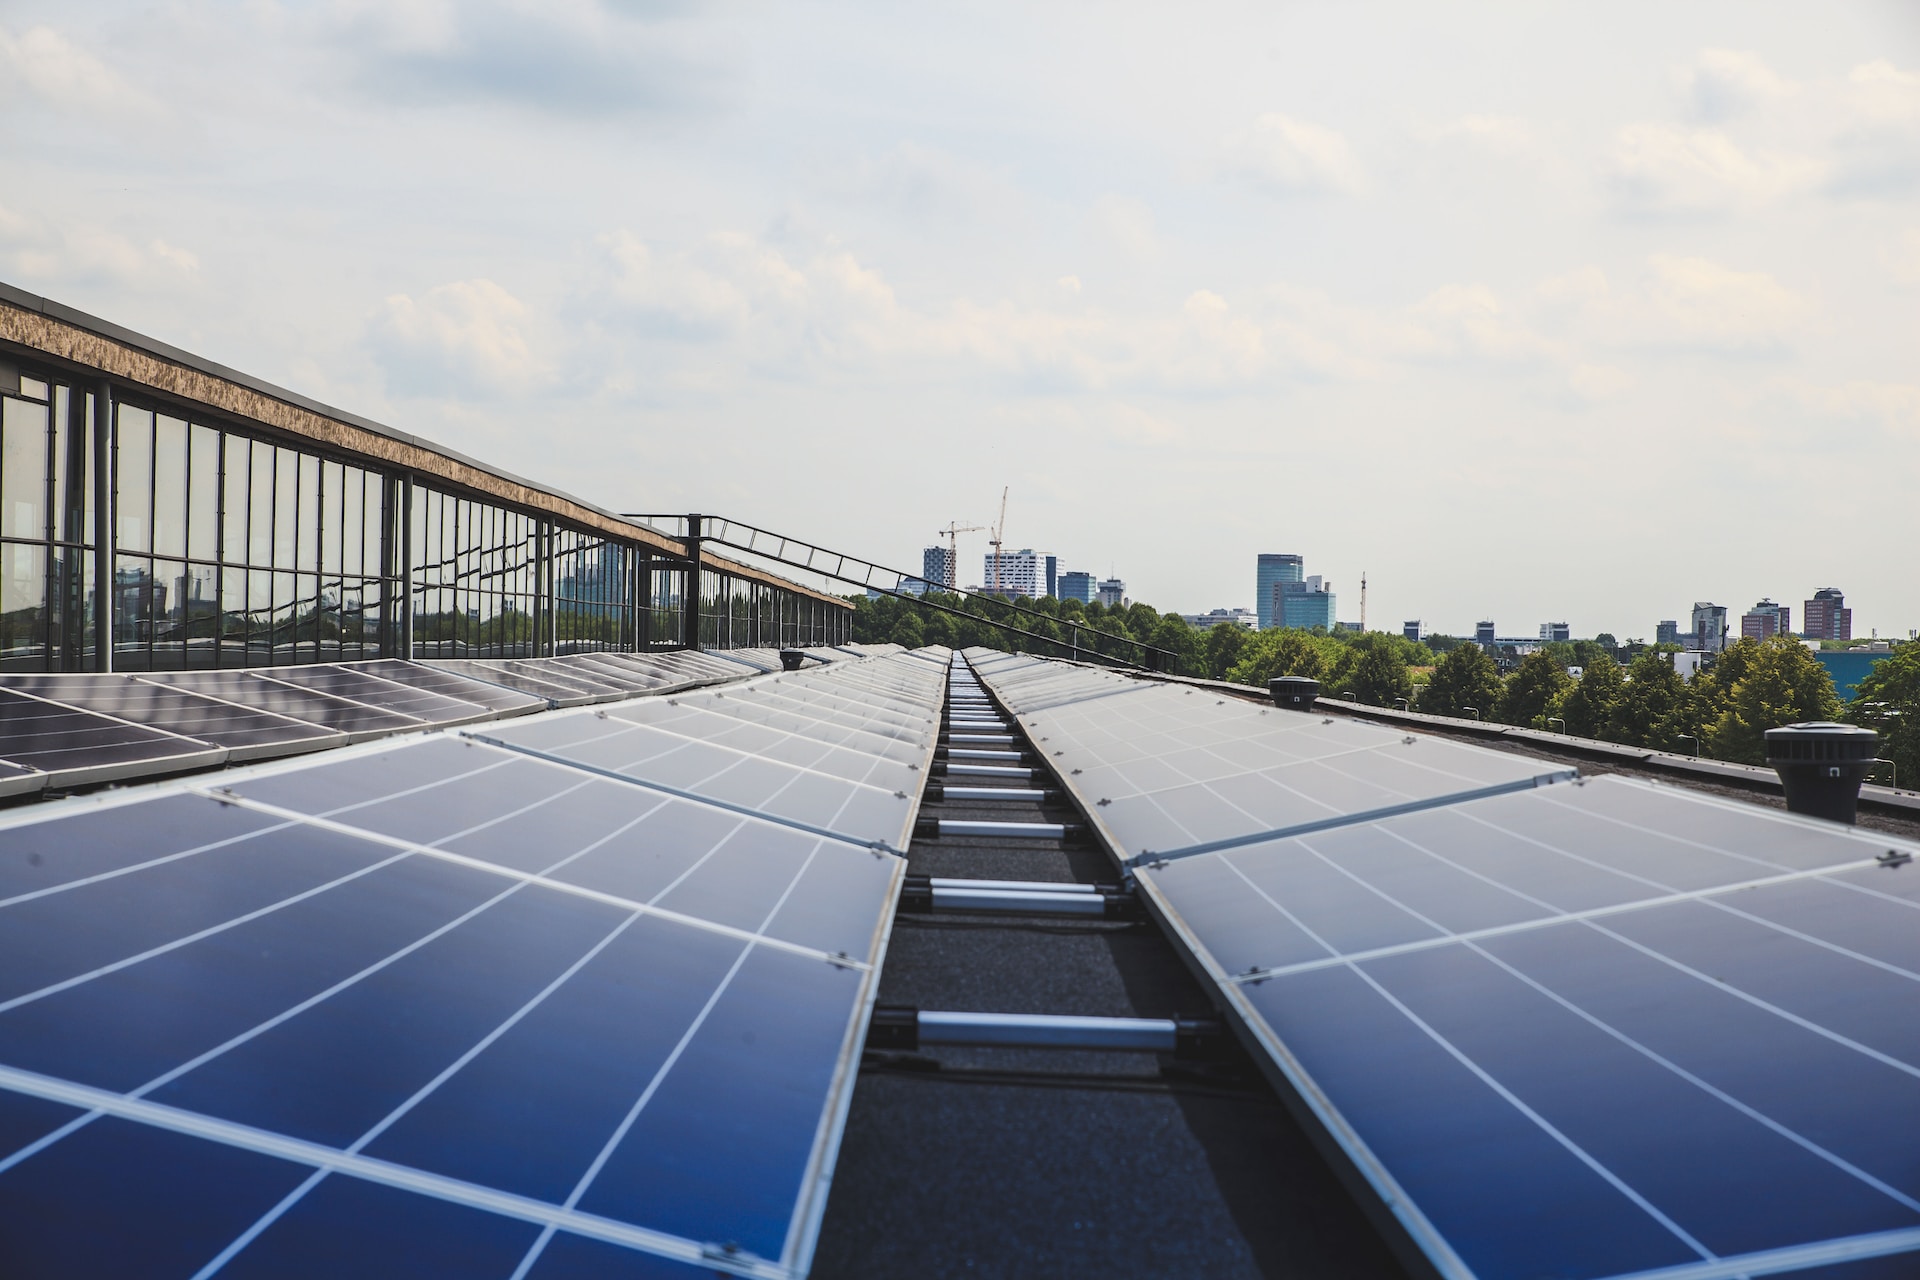 New York State achieves a renewable milestone with its largest rooftop solar installation project.